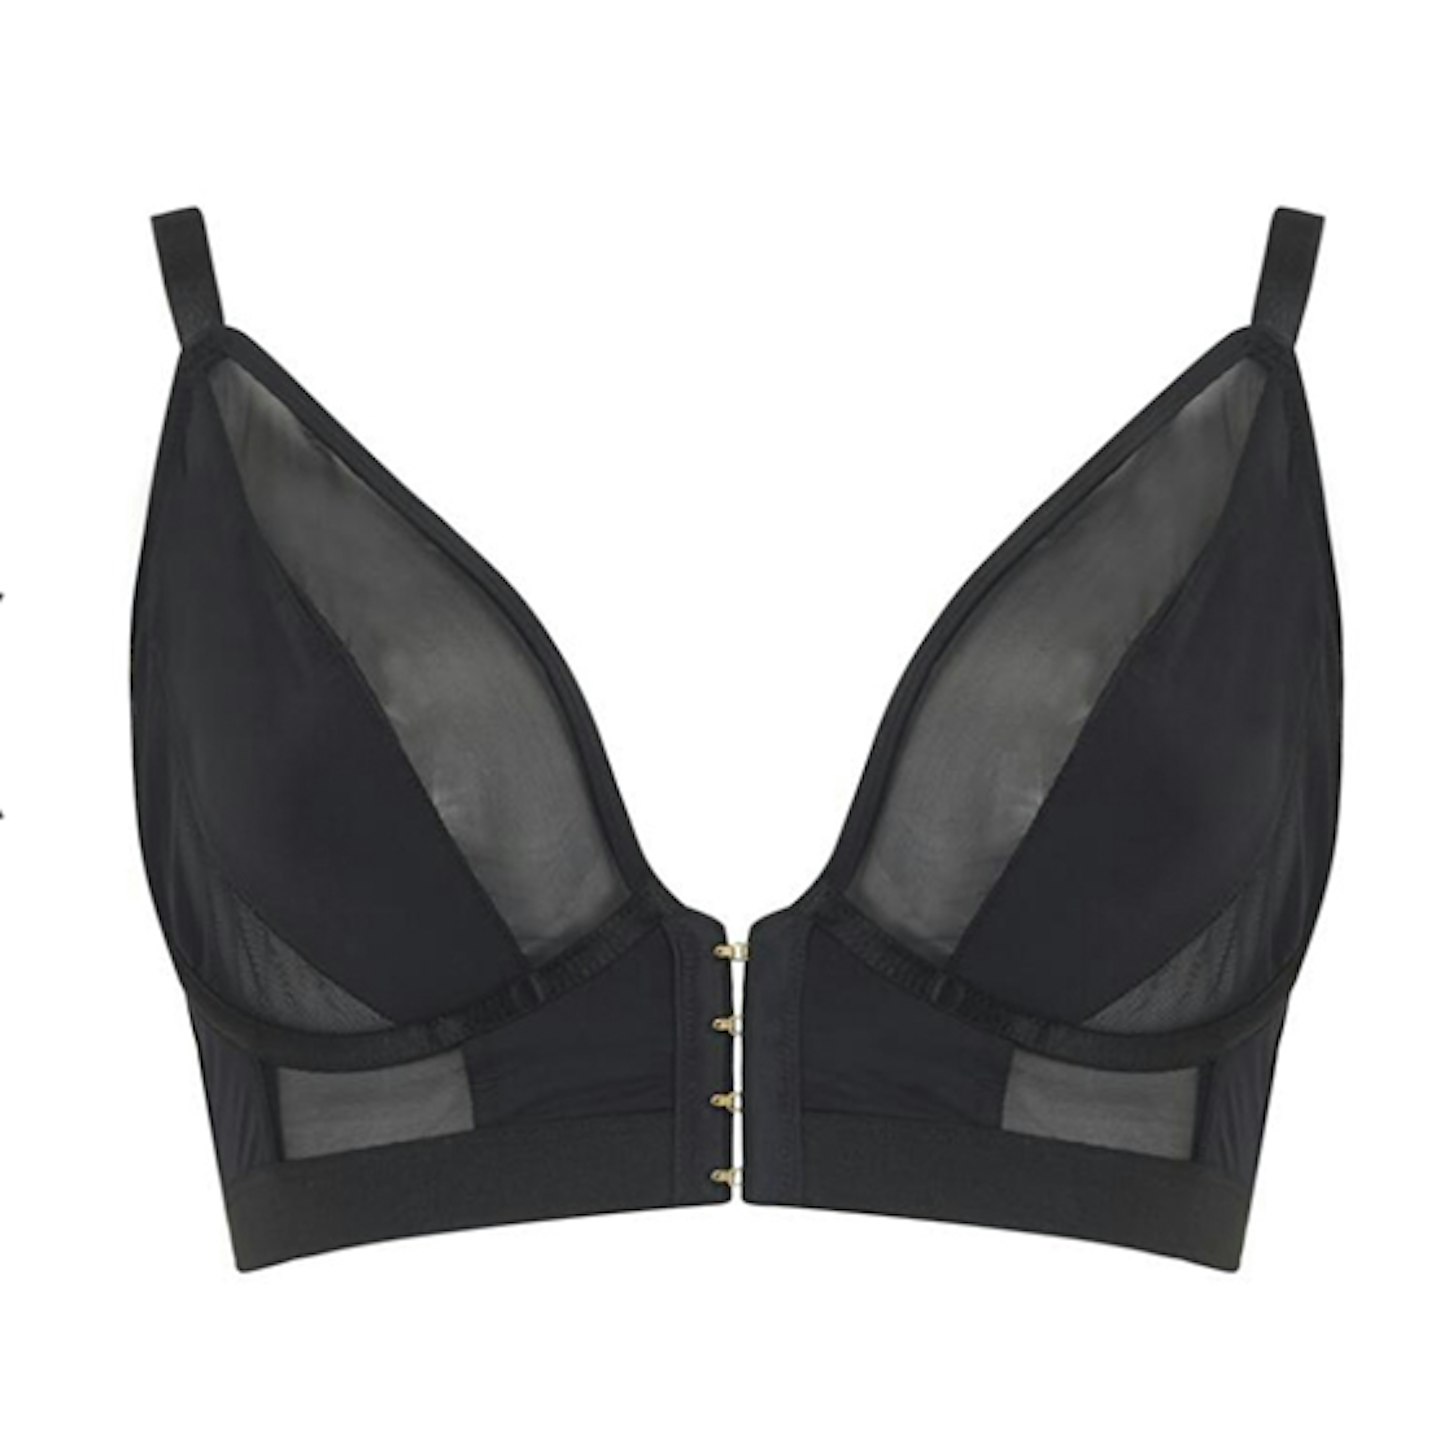 How to bra fit for Asymmetrical boobs – Curvy Kate CA